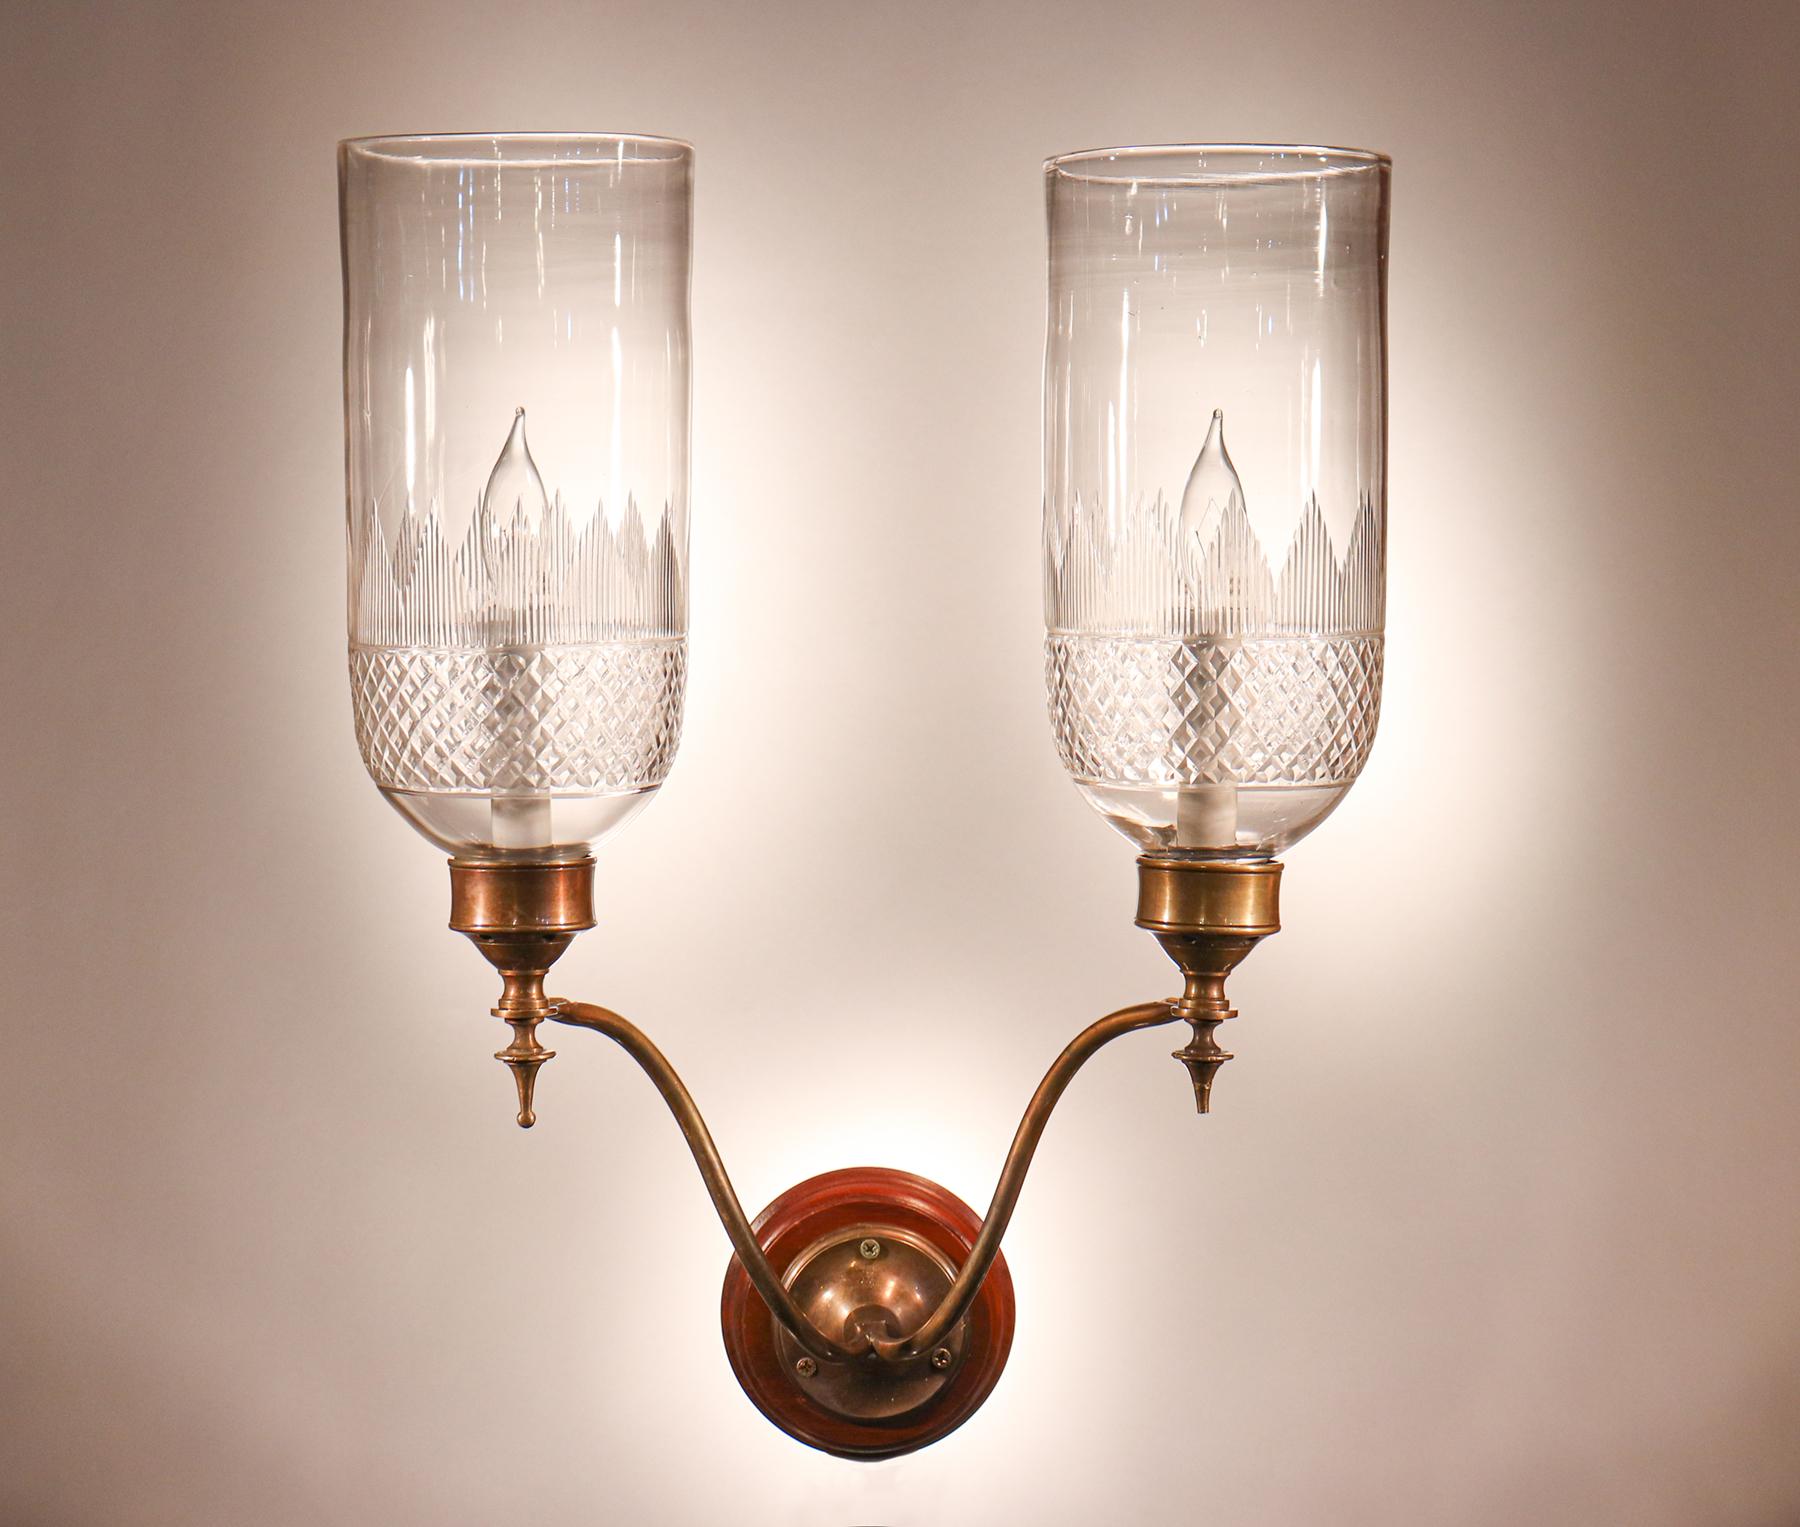 English Pair of 19th Century Hurricane Shade Double-Arm Wall Sconces